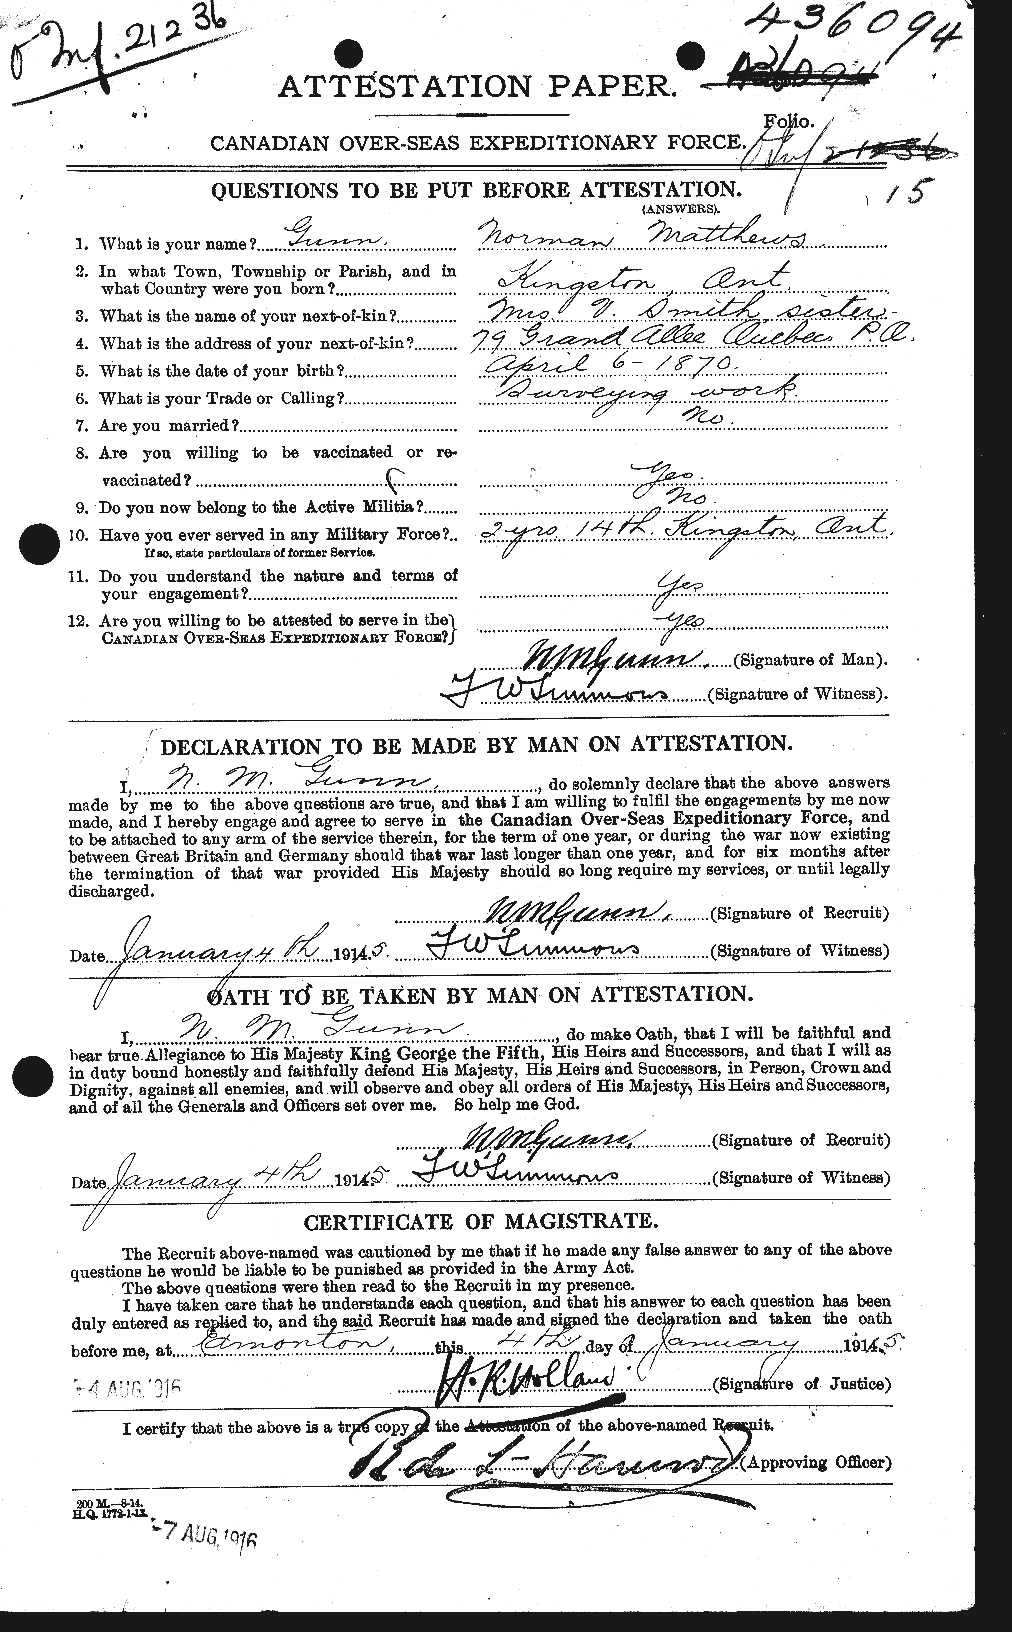 Personnel Records of the First World War - CEF 369316a